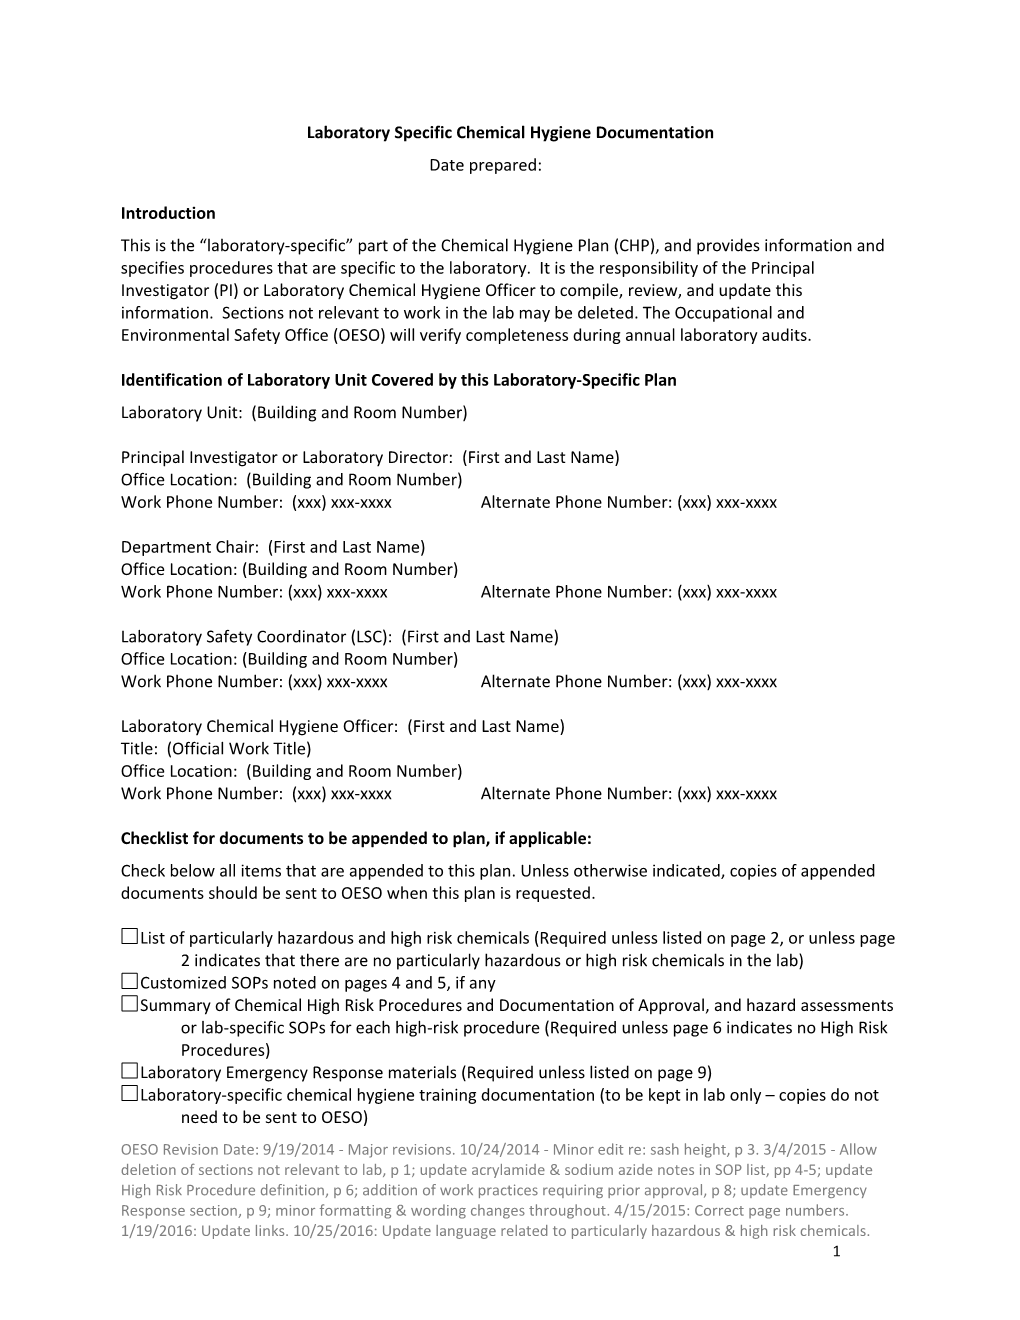 Laboratory Specific Chemical Hygiene Plan Template